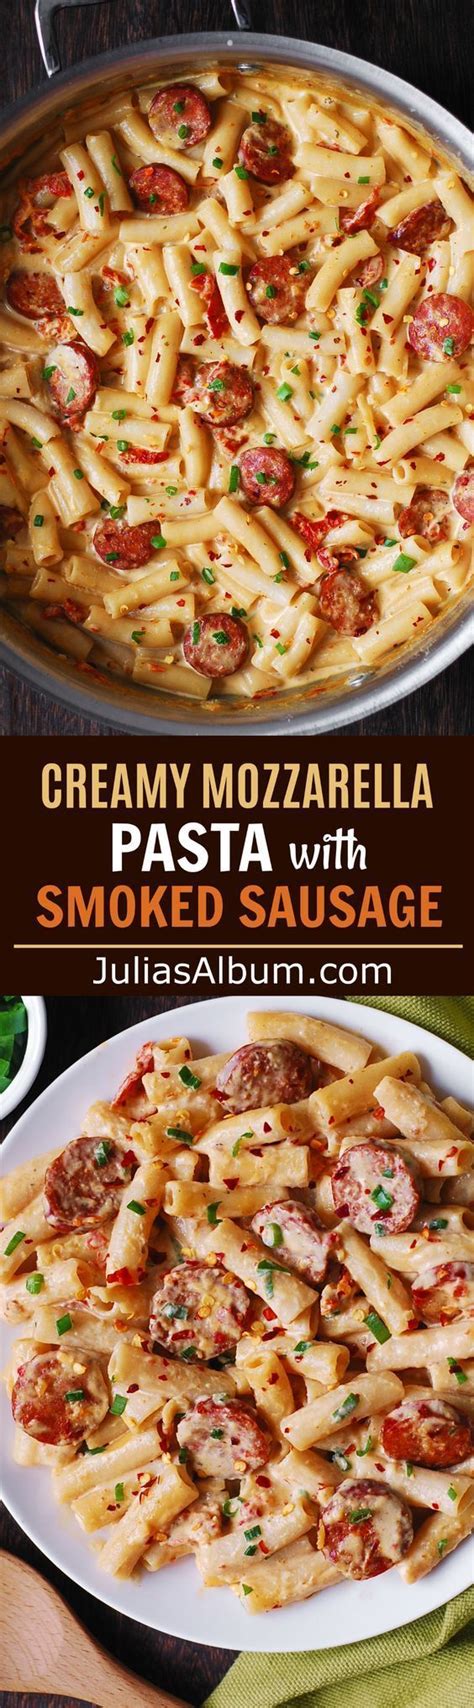 To cook kielbasa (or other smoked sausage) on the stovetop, simply slice the sausage into rounds and pan fry until crispy and browned on the outside. Creamy Mozzarella Pasta with Smoked Sausage. Easy ...